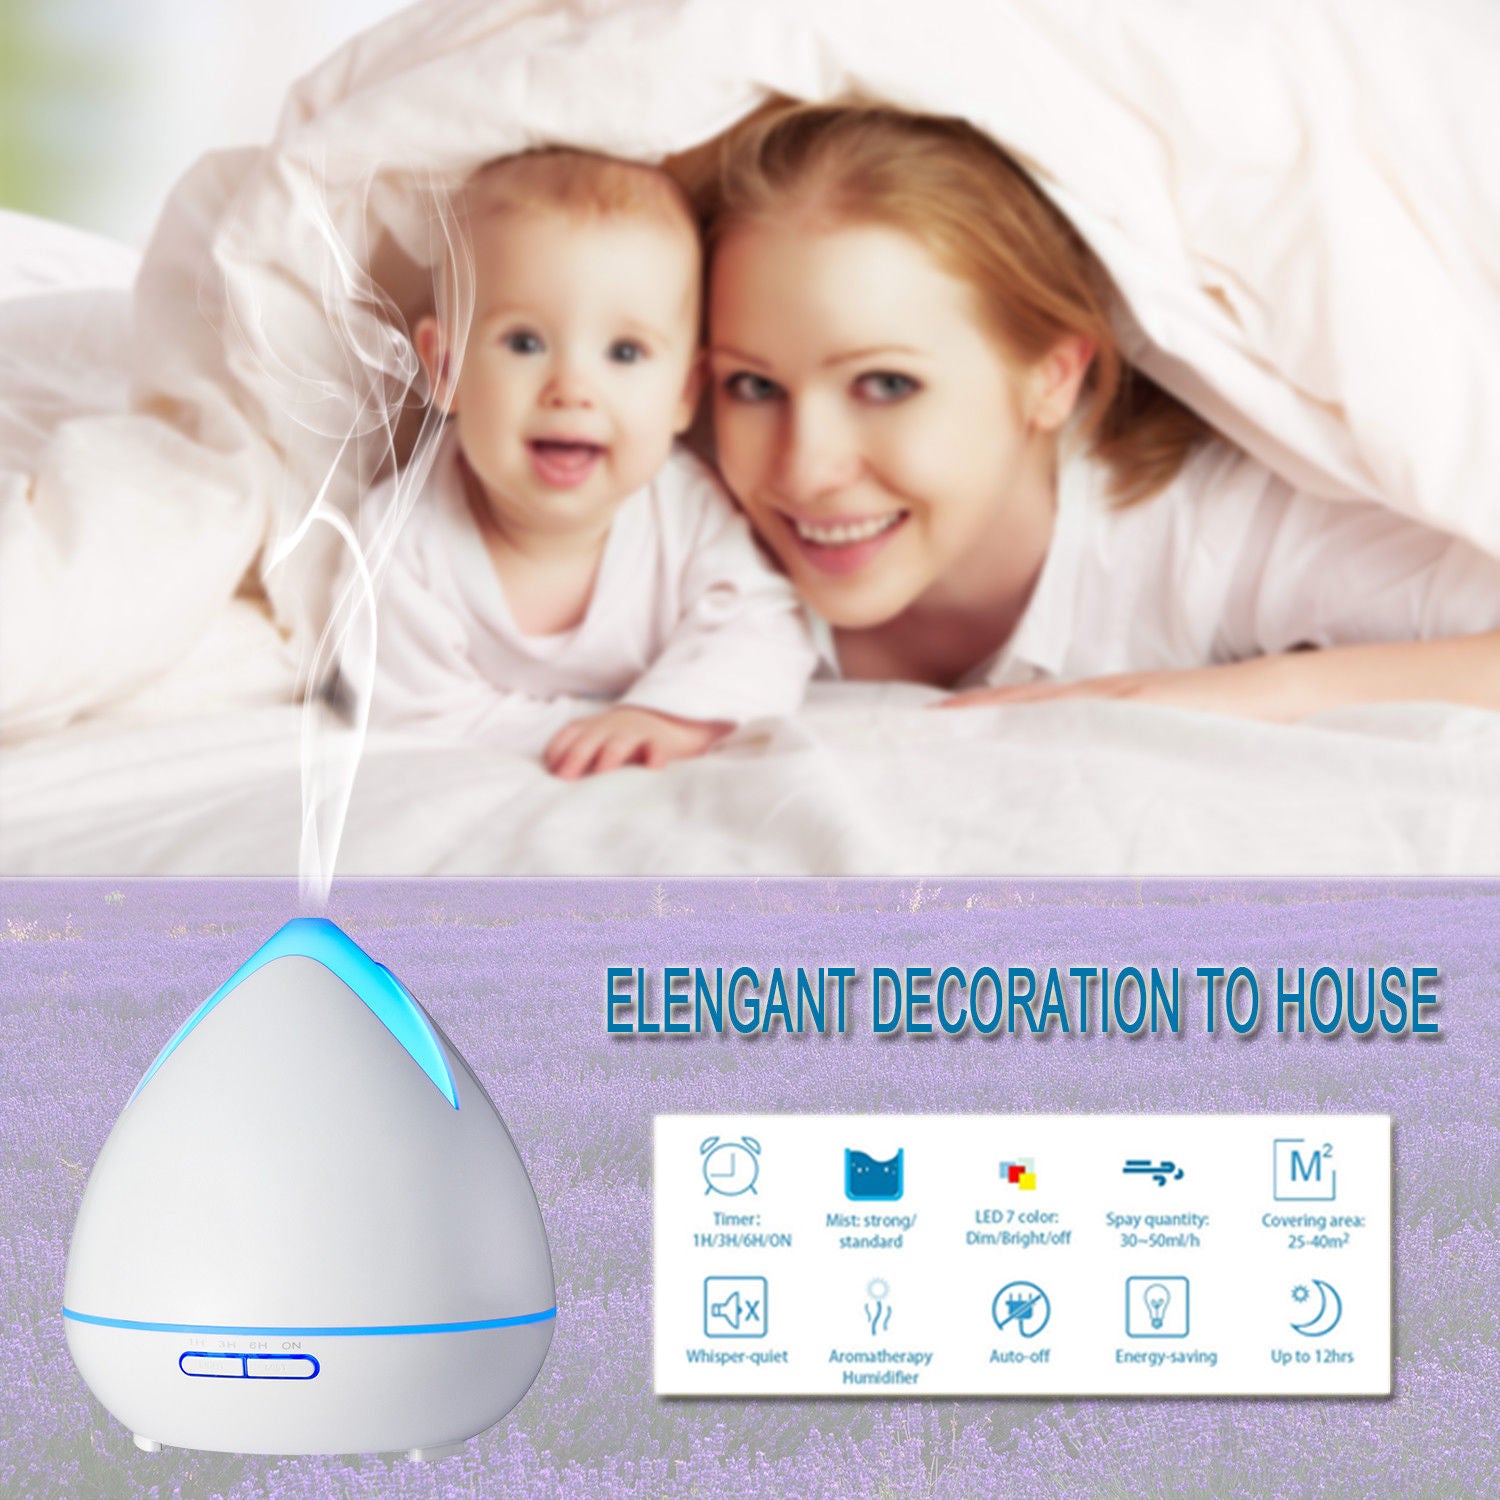 Essential Oils Ultrasonic Aromatherapy Diffuser Air Humidifier Purify 400ML White - AULASH